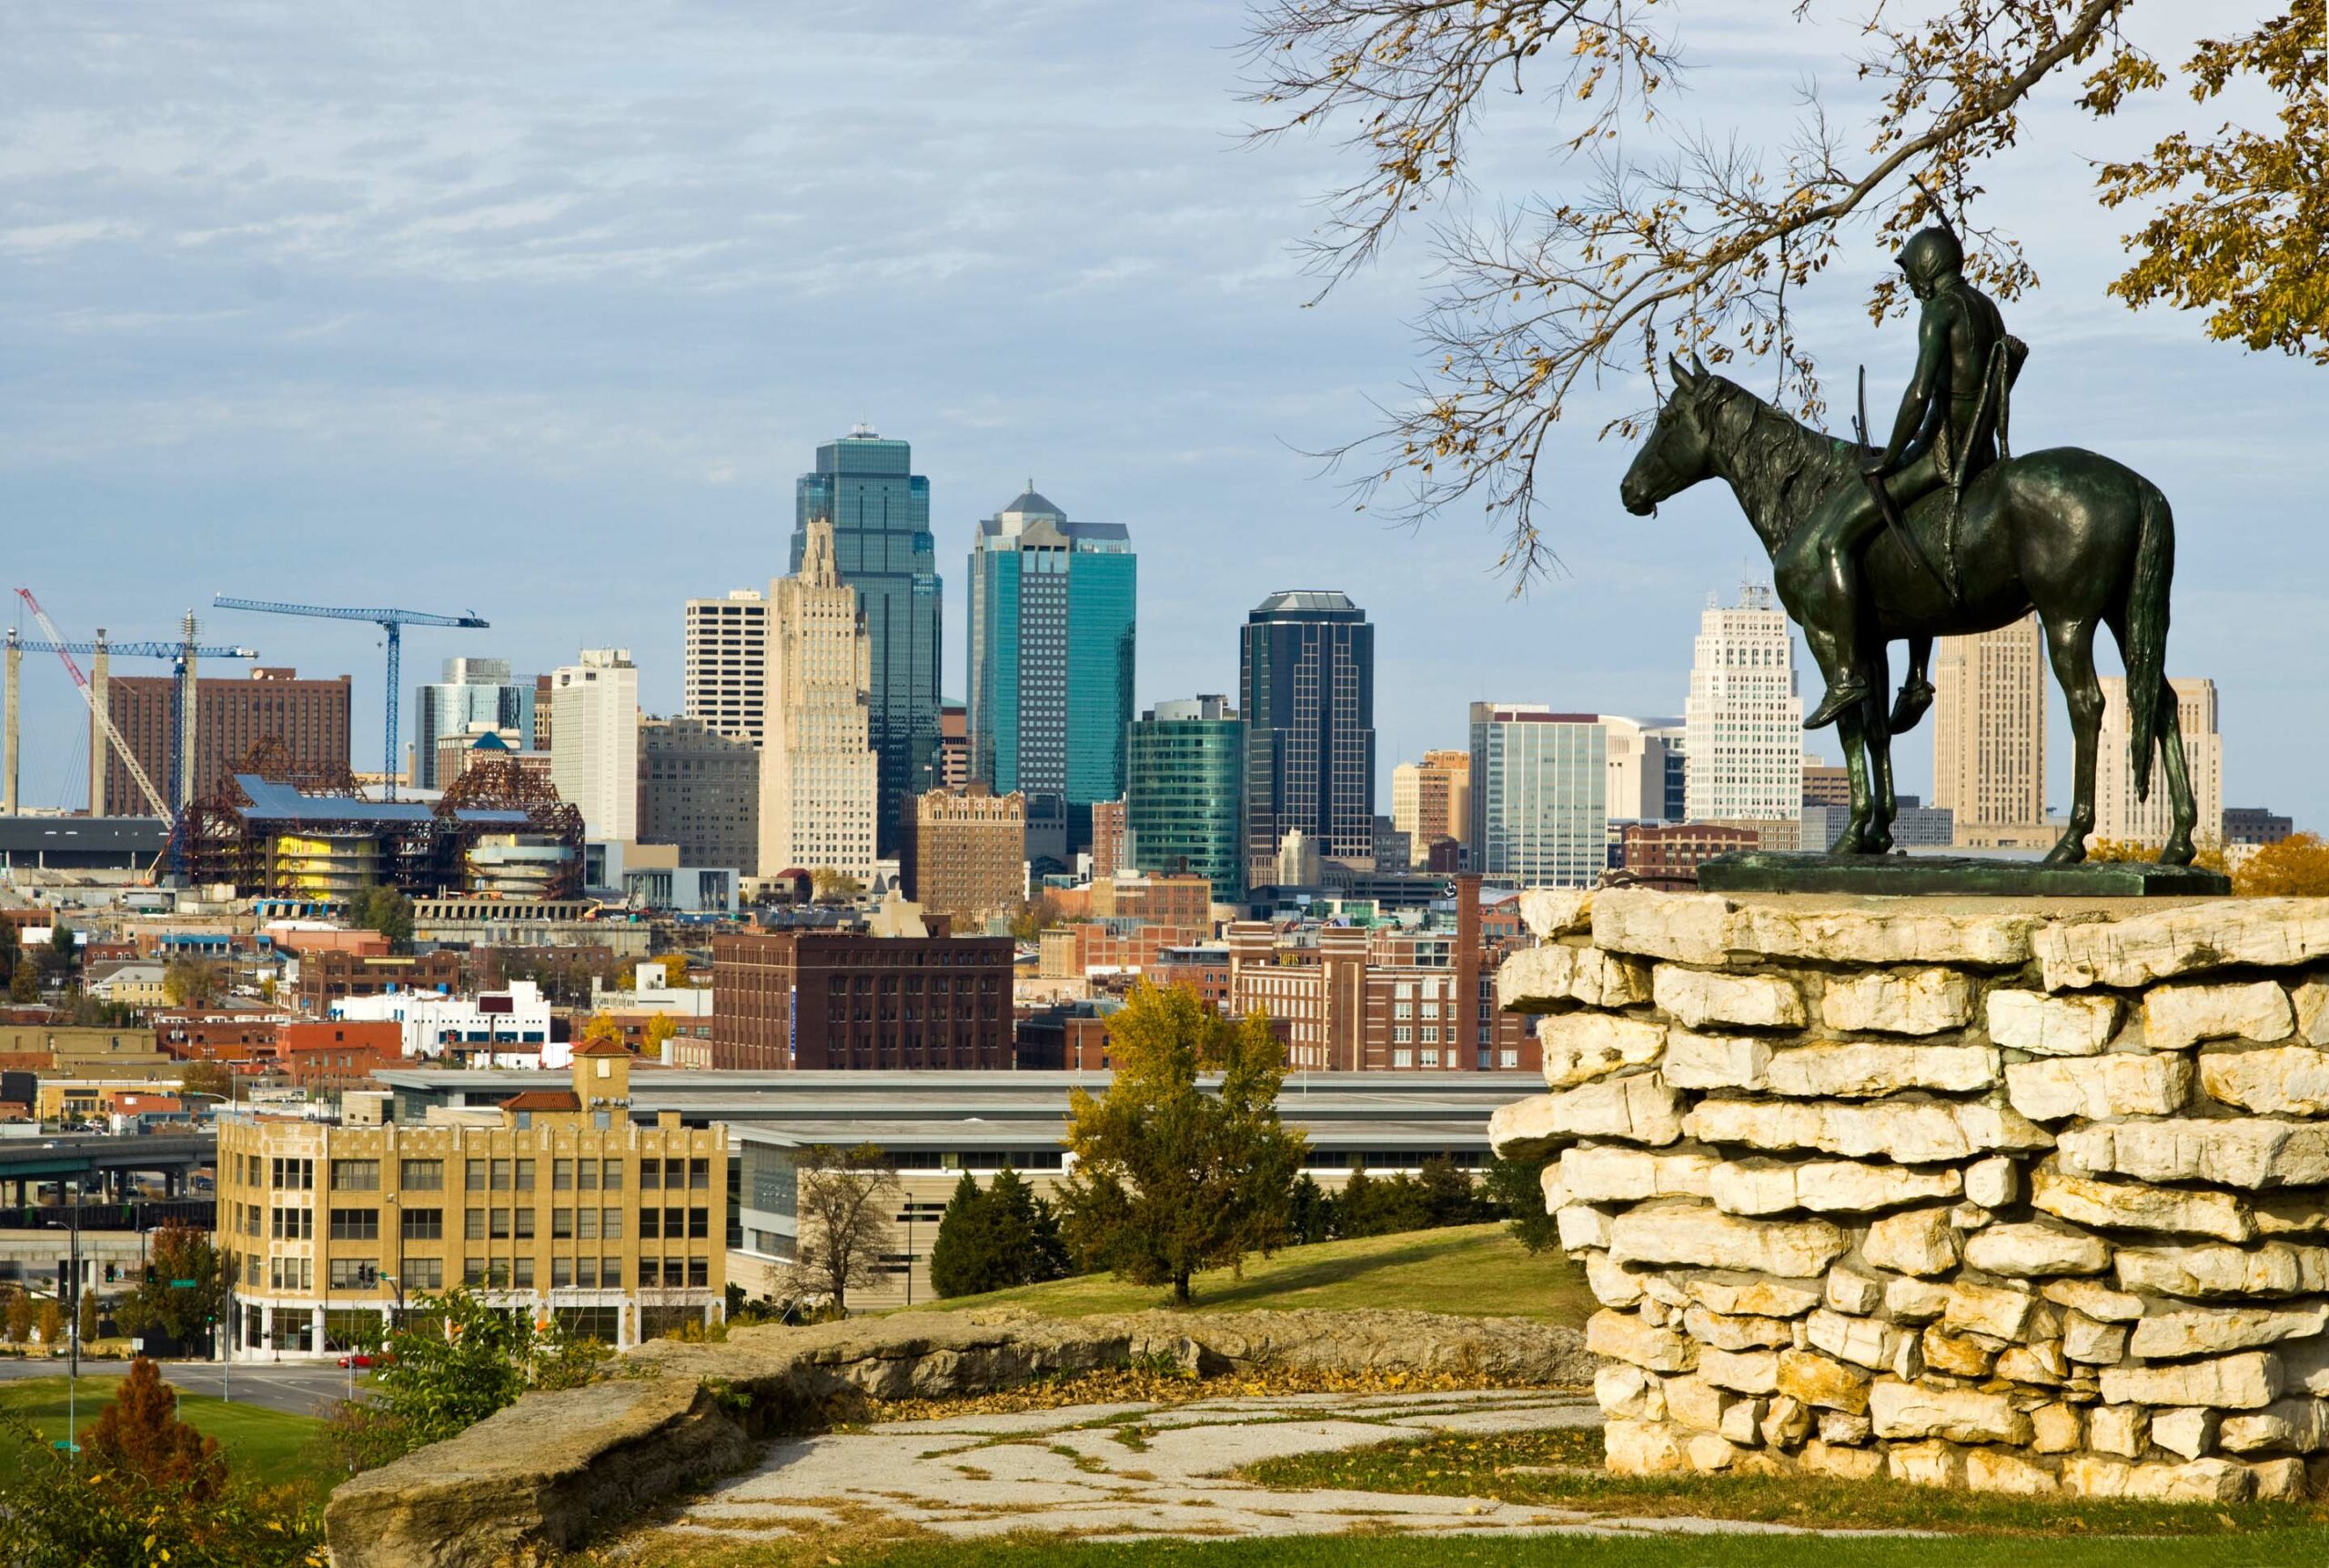 A bronze statue of a Native American on horseback overlooks the skyline of Kansas City. The cityscape features a mix of modern and historic buildings under a partly cloudy sky. The statue is perched on a stone pedestal surrounded by a grassy area.